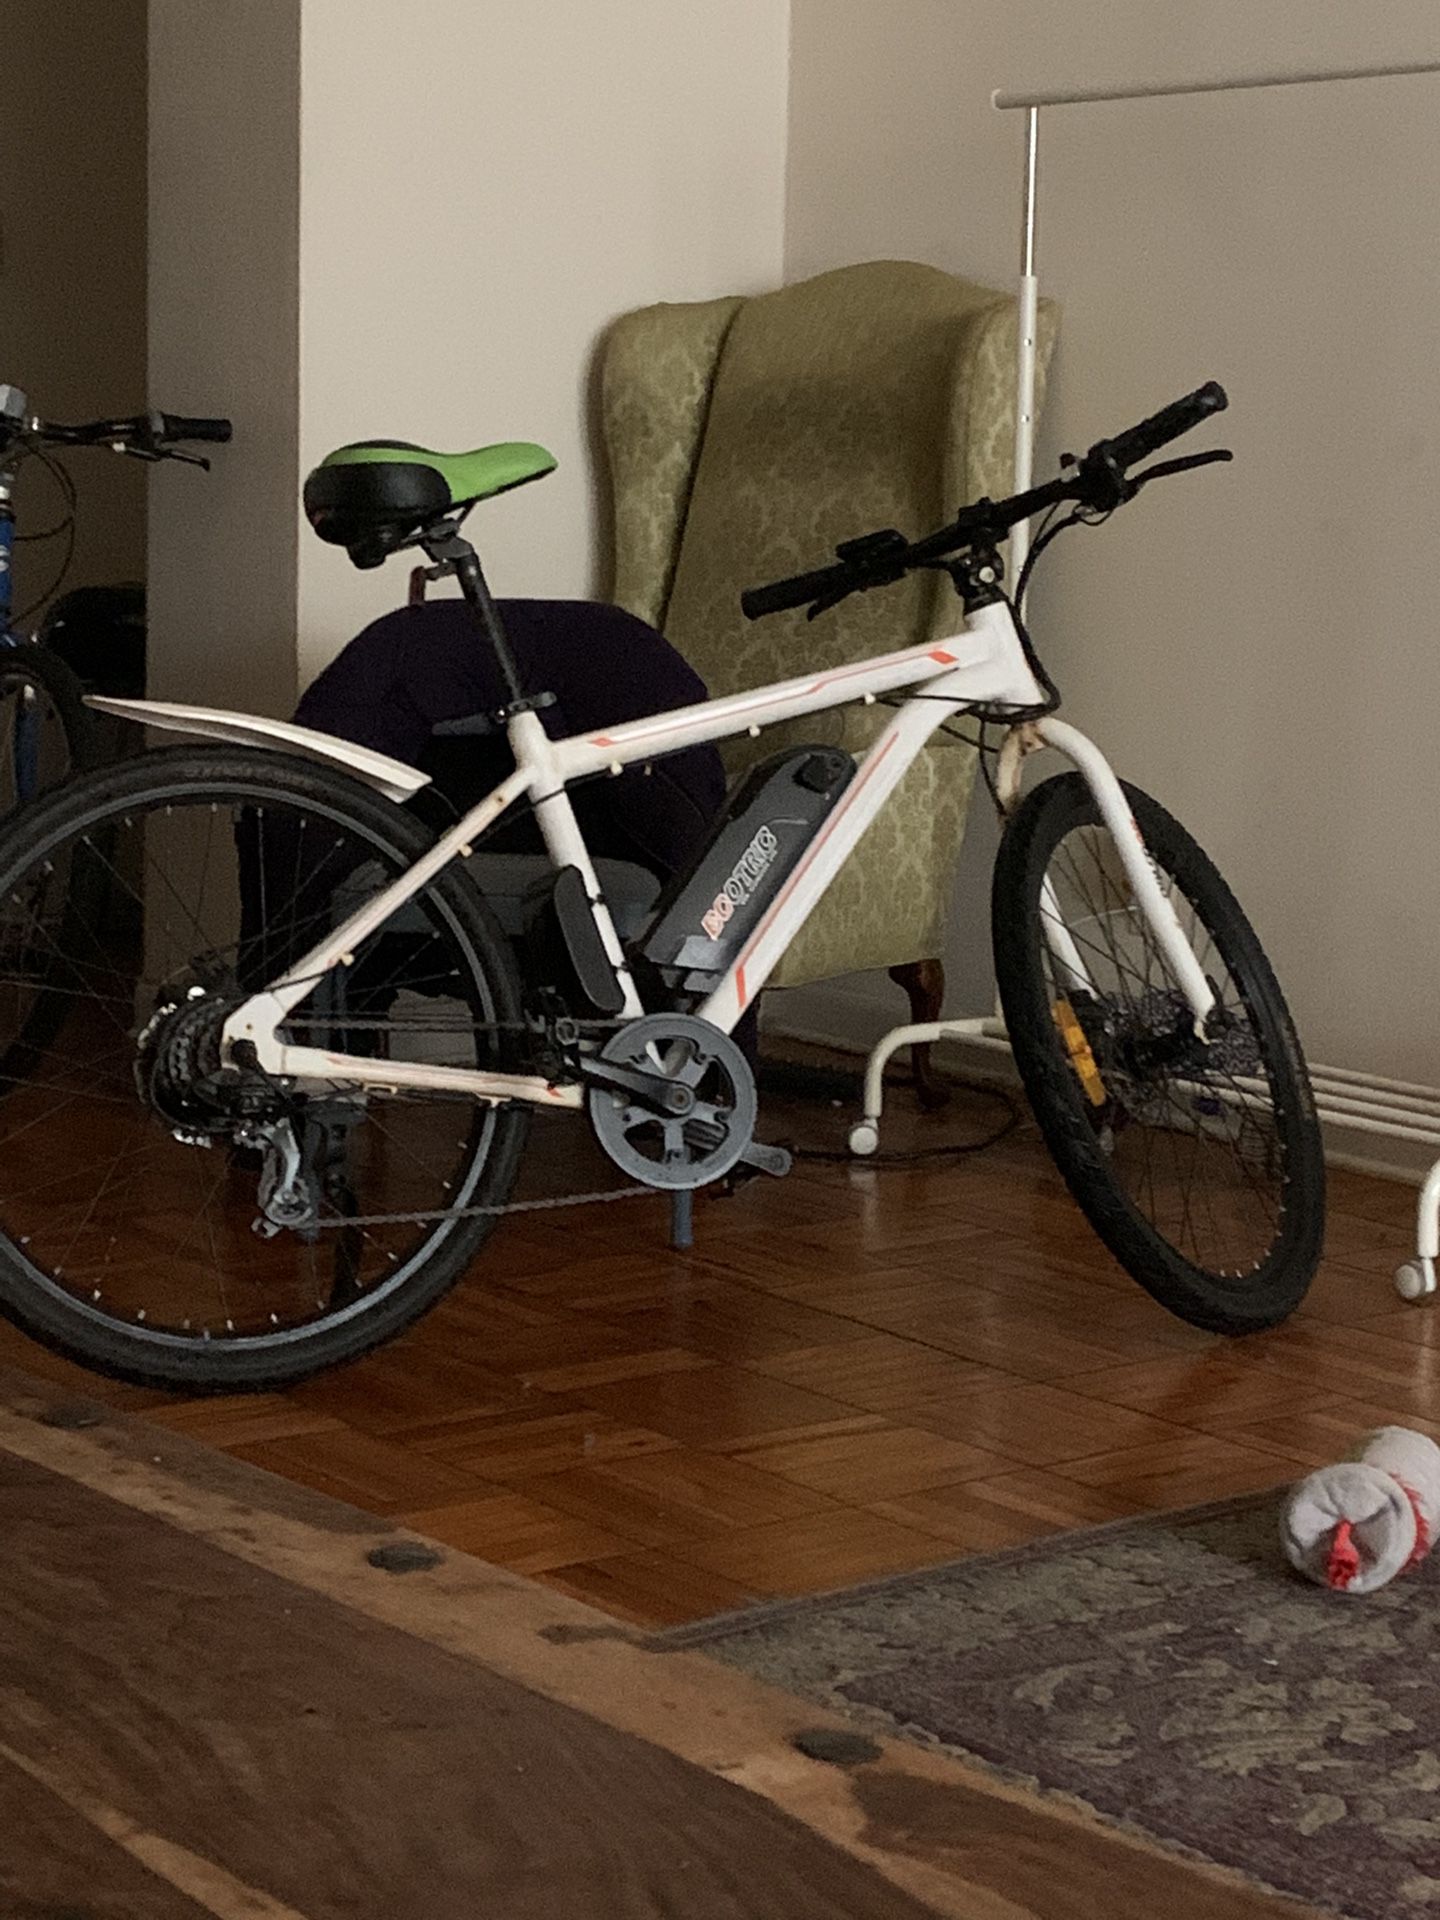 Two Bicycles For Sale One C400 Canonndale Hybrid And The Other Vortex Electric Bike